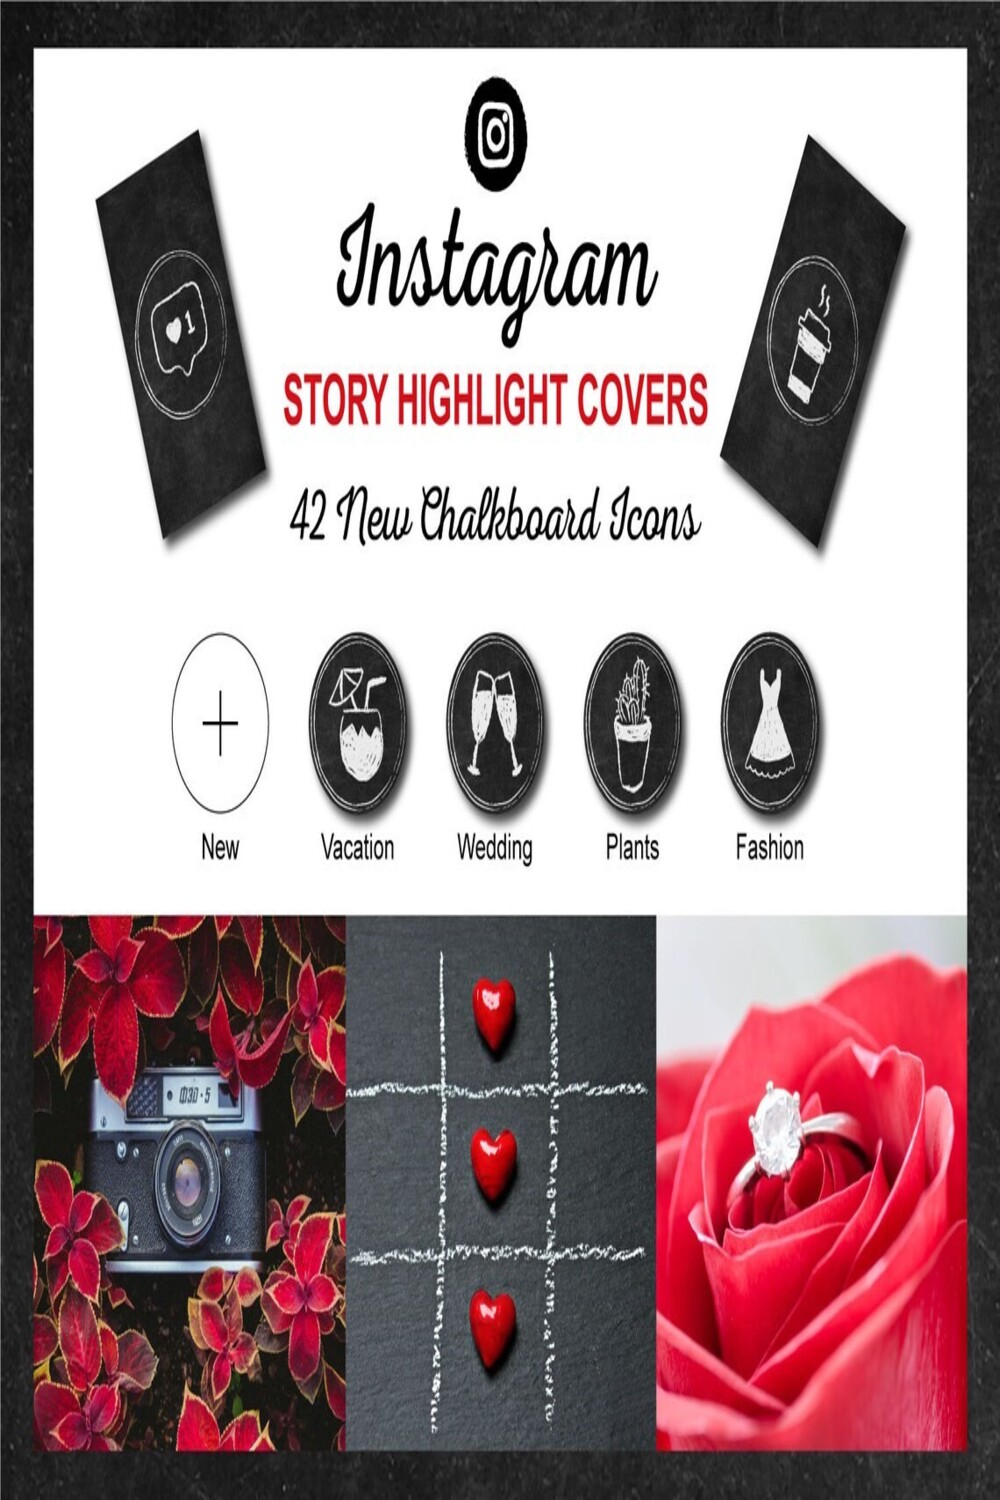 Instagram Story Highlight Covers (42 New ChalkBoard Icons) pinterest image.